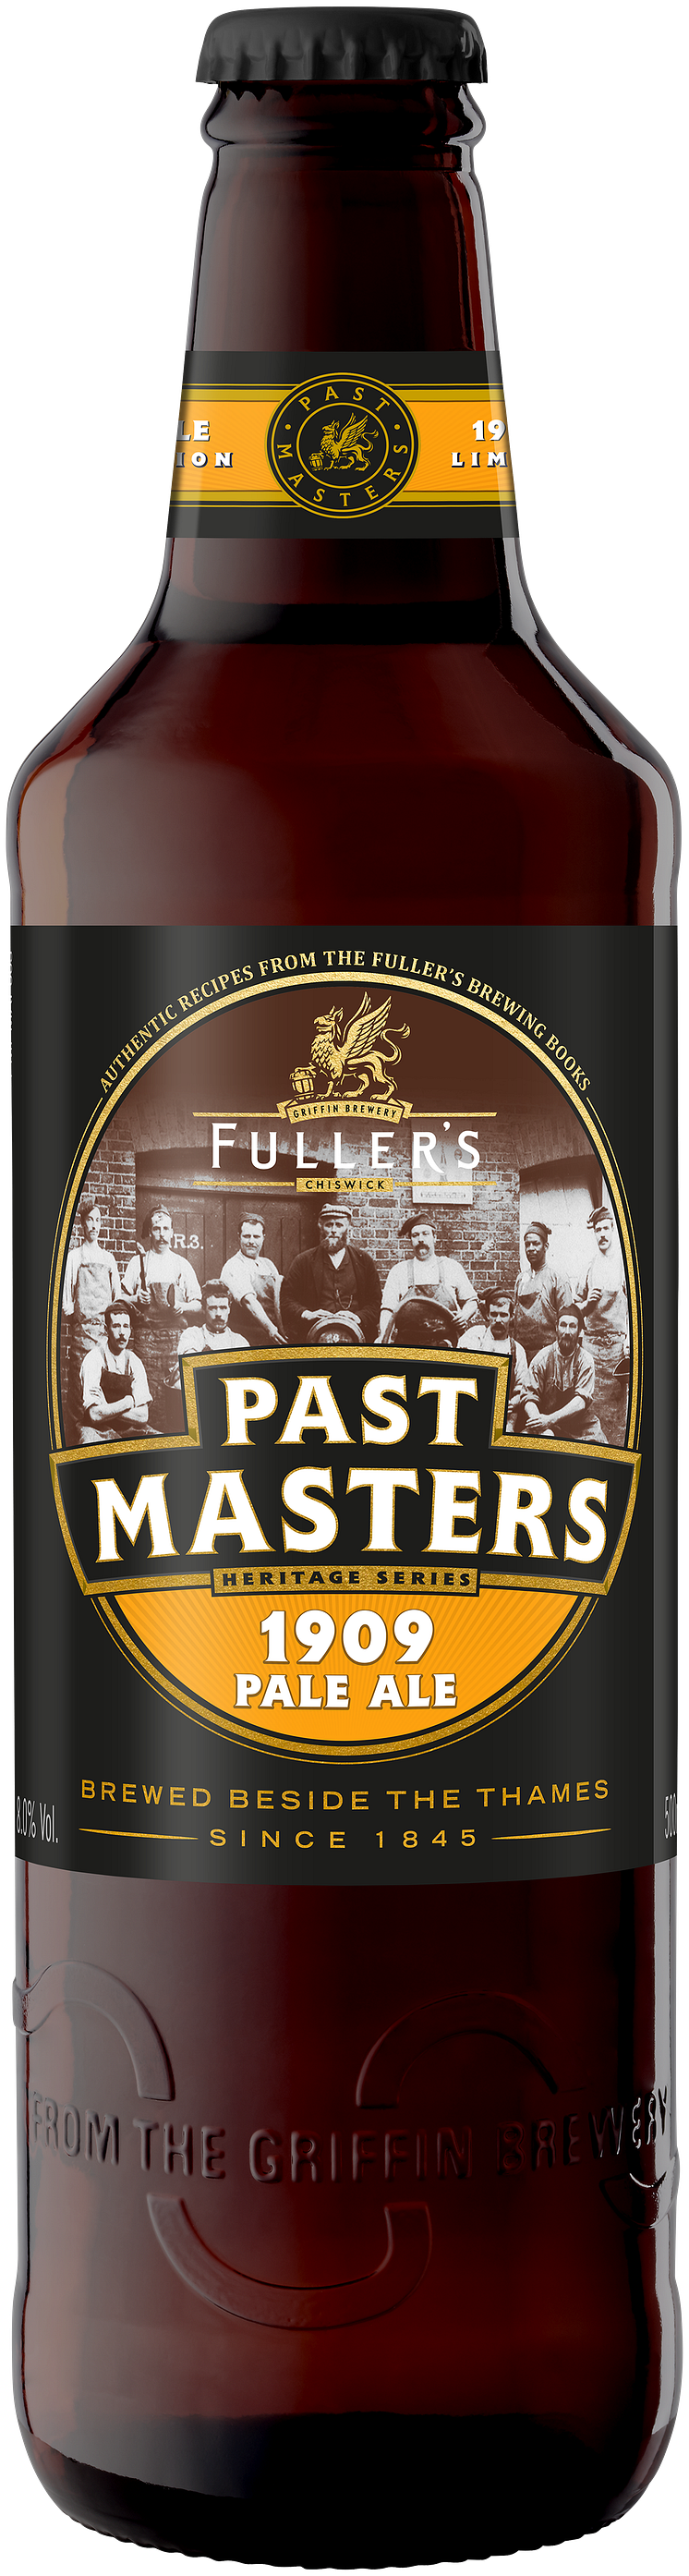 Fullers-Past-Masters-Pale-Ale-1909